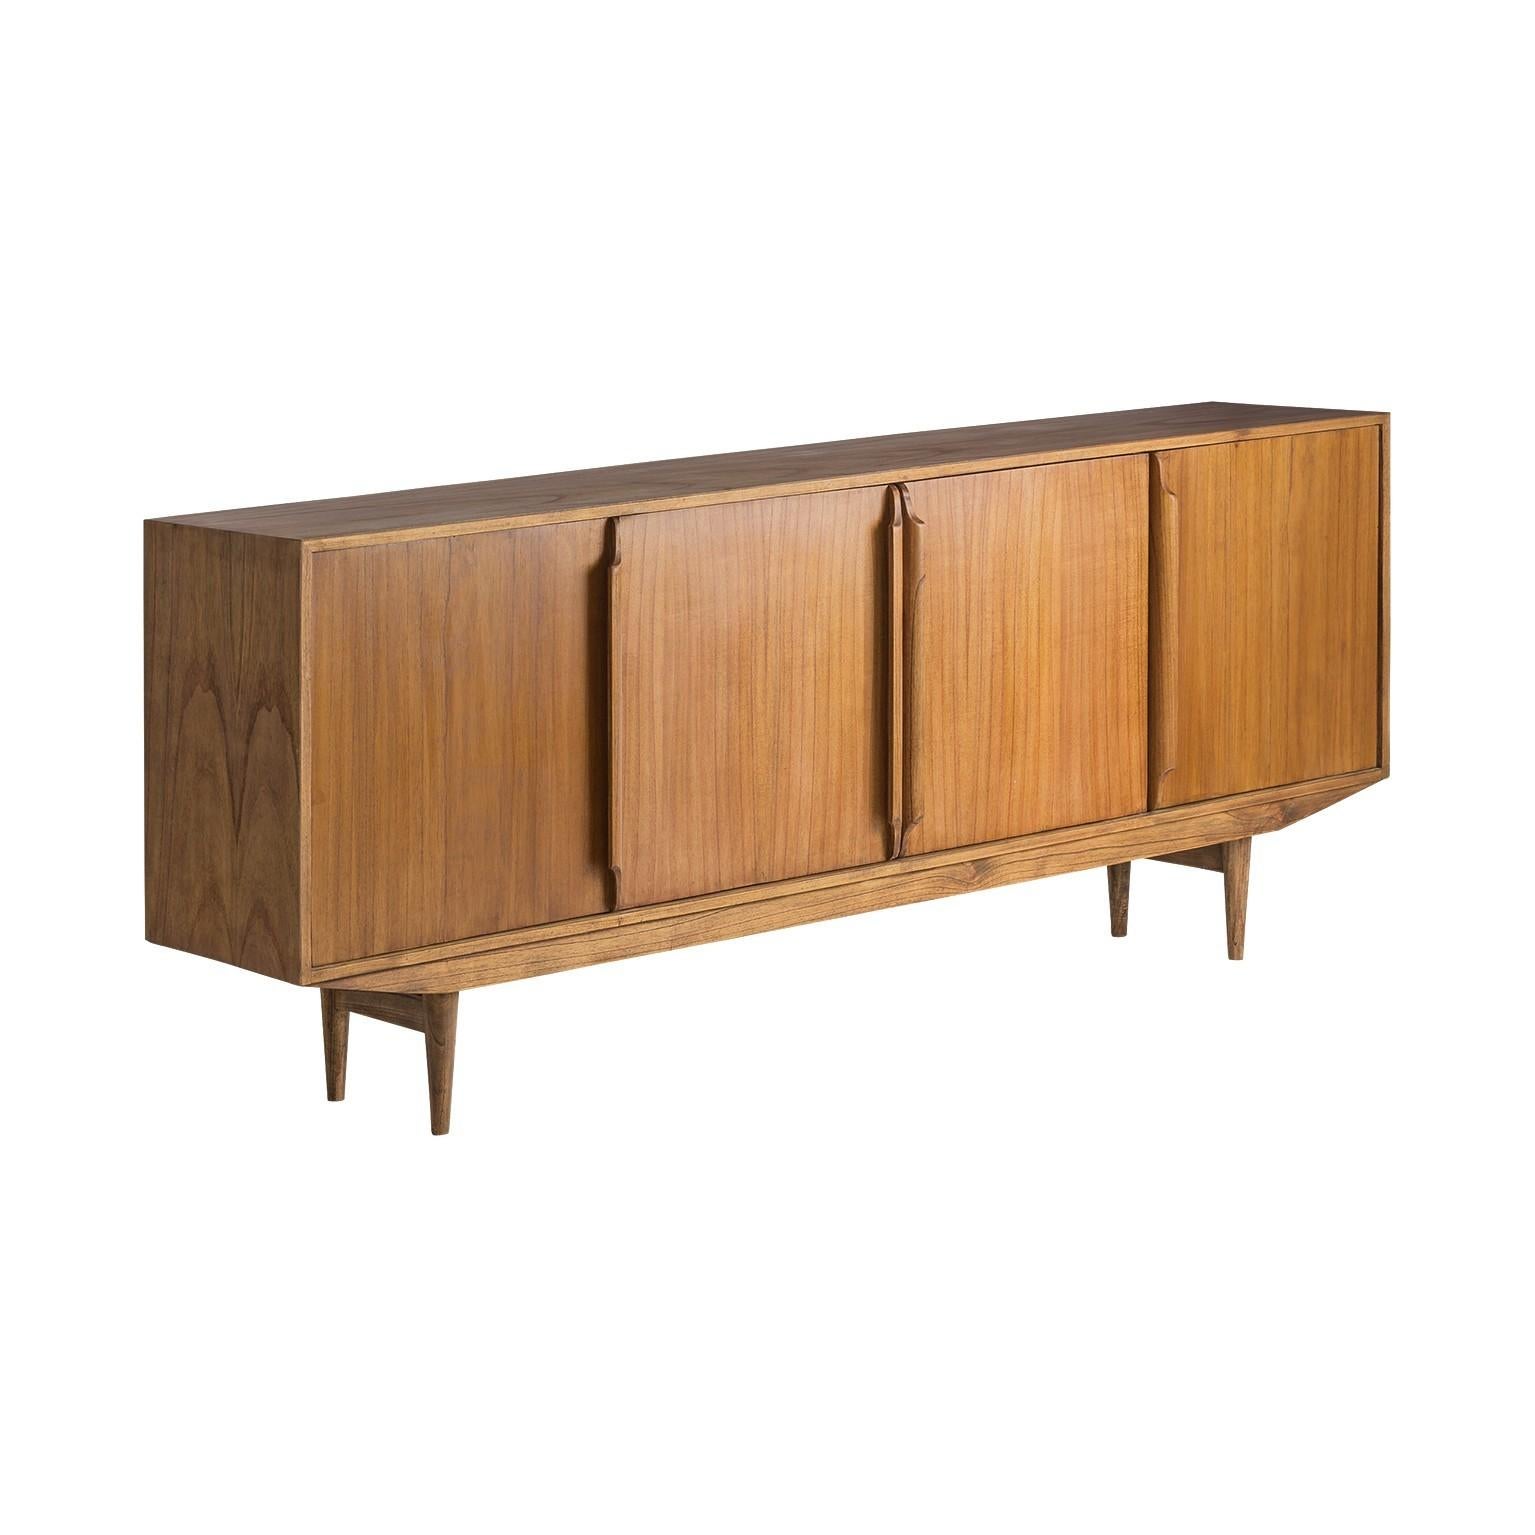 Scandinavian look and vintage design, for this sideboard with sober lines, refined and harmonious composed of four spaces, nice work on carved wood handles. New item, never used.